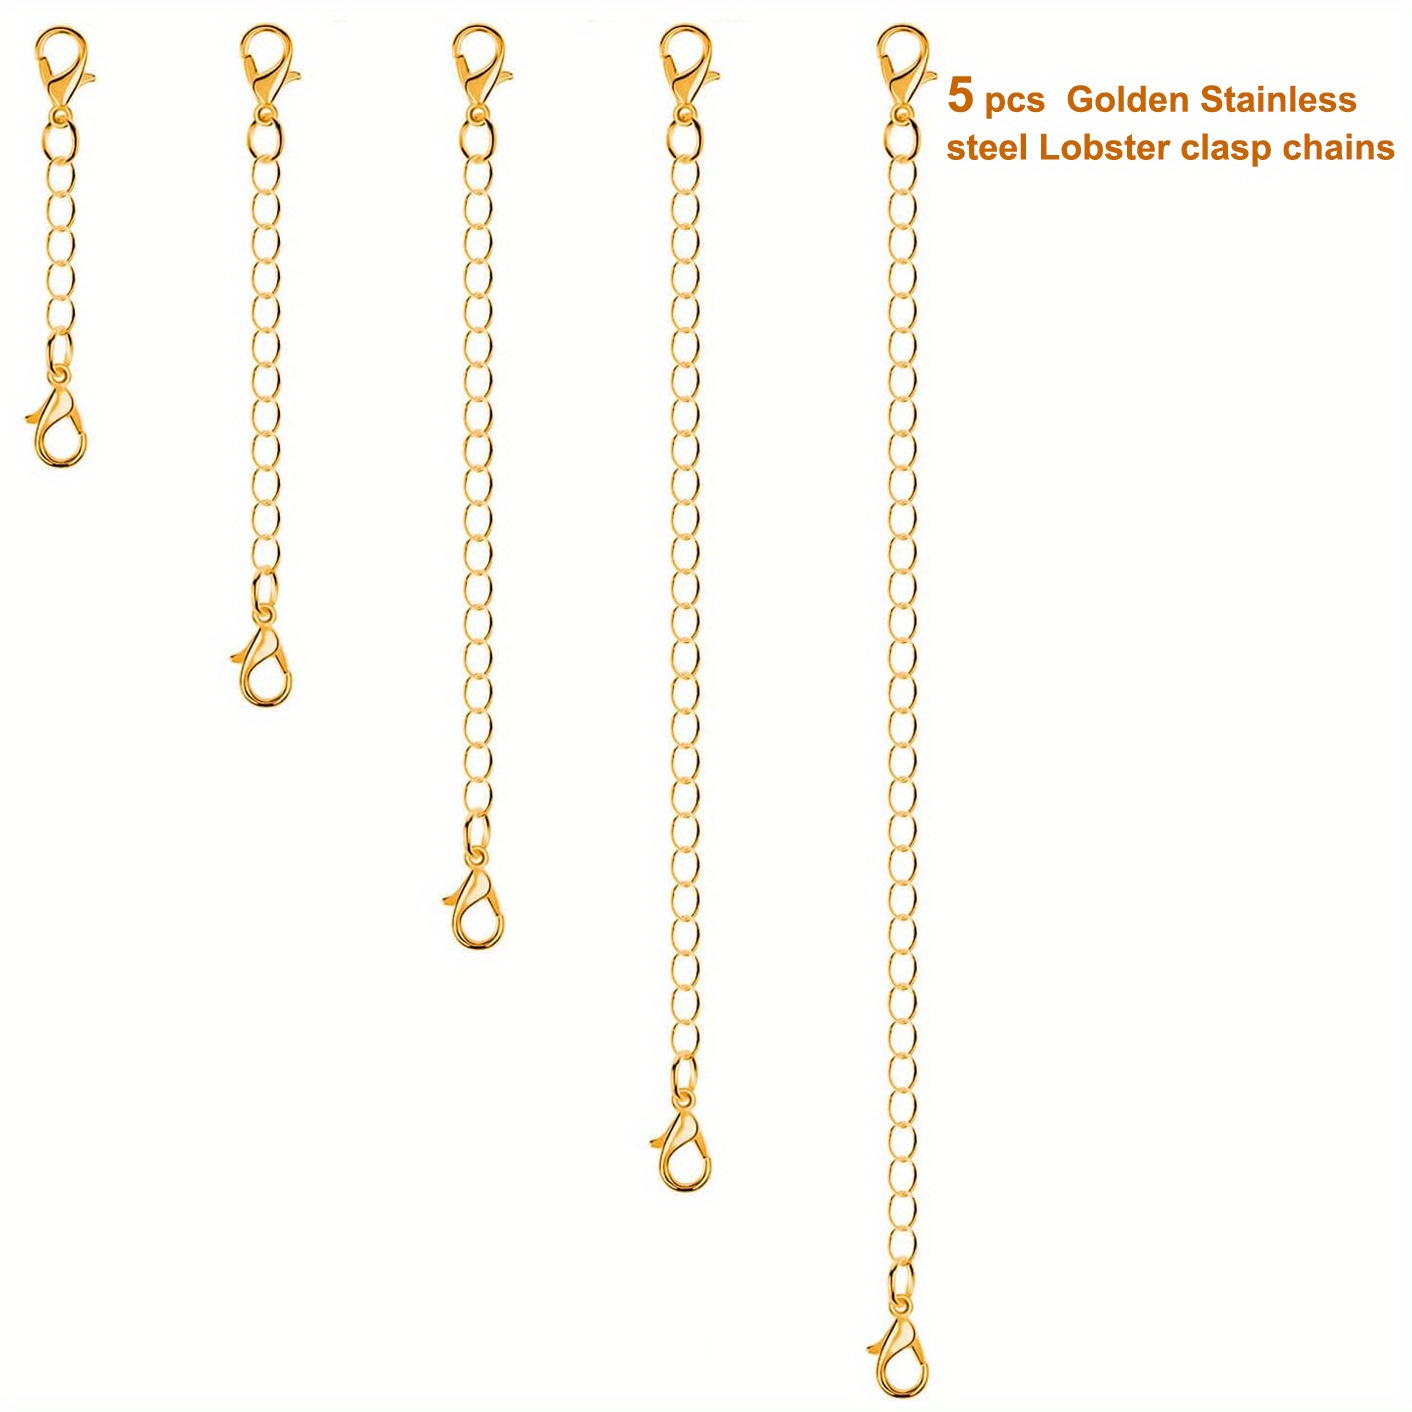  Necklace Extender 10Pcs Chain Extenders for Necklaces  Bracelet,Gold and Silver Plated Extender Chain Necklace Chains for Jewelry  Making : Arts, Crafts & Sewing